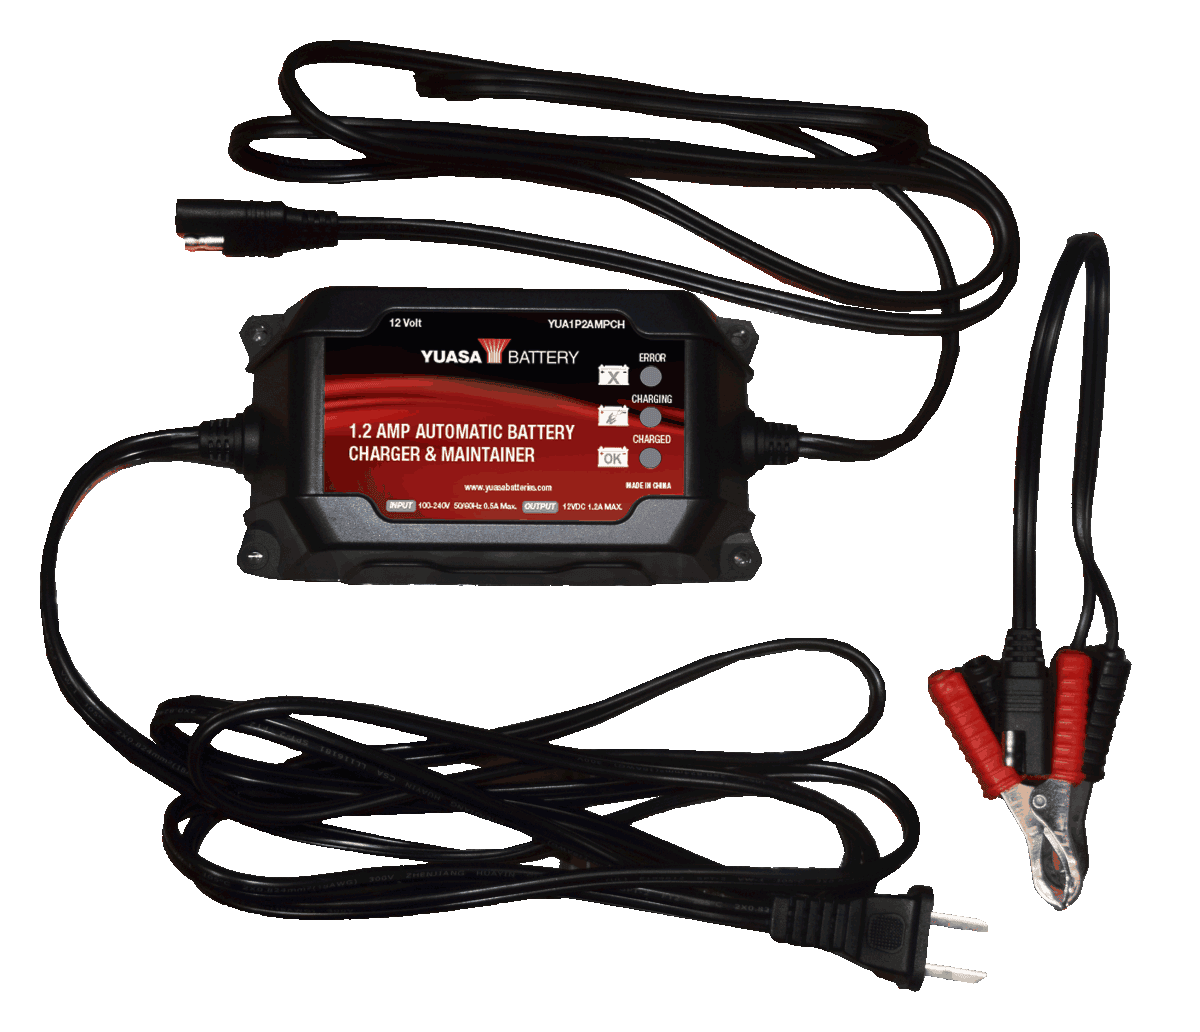 Yuasa 1.2 AMP Automatic Battery Charger & Maintainer